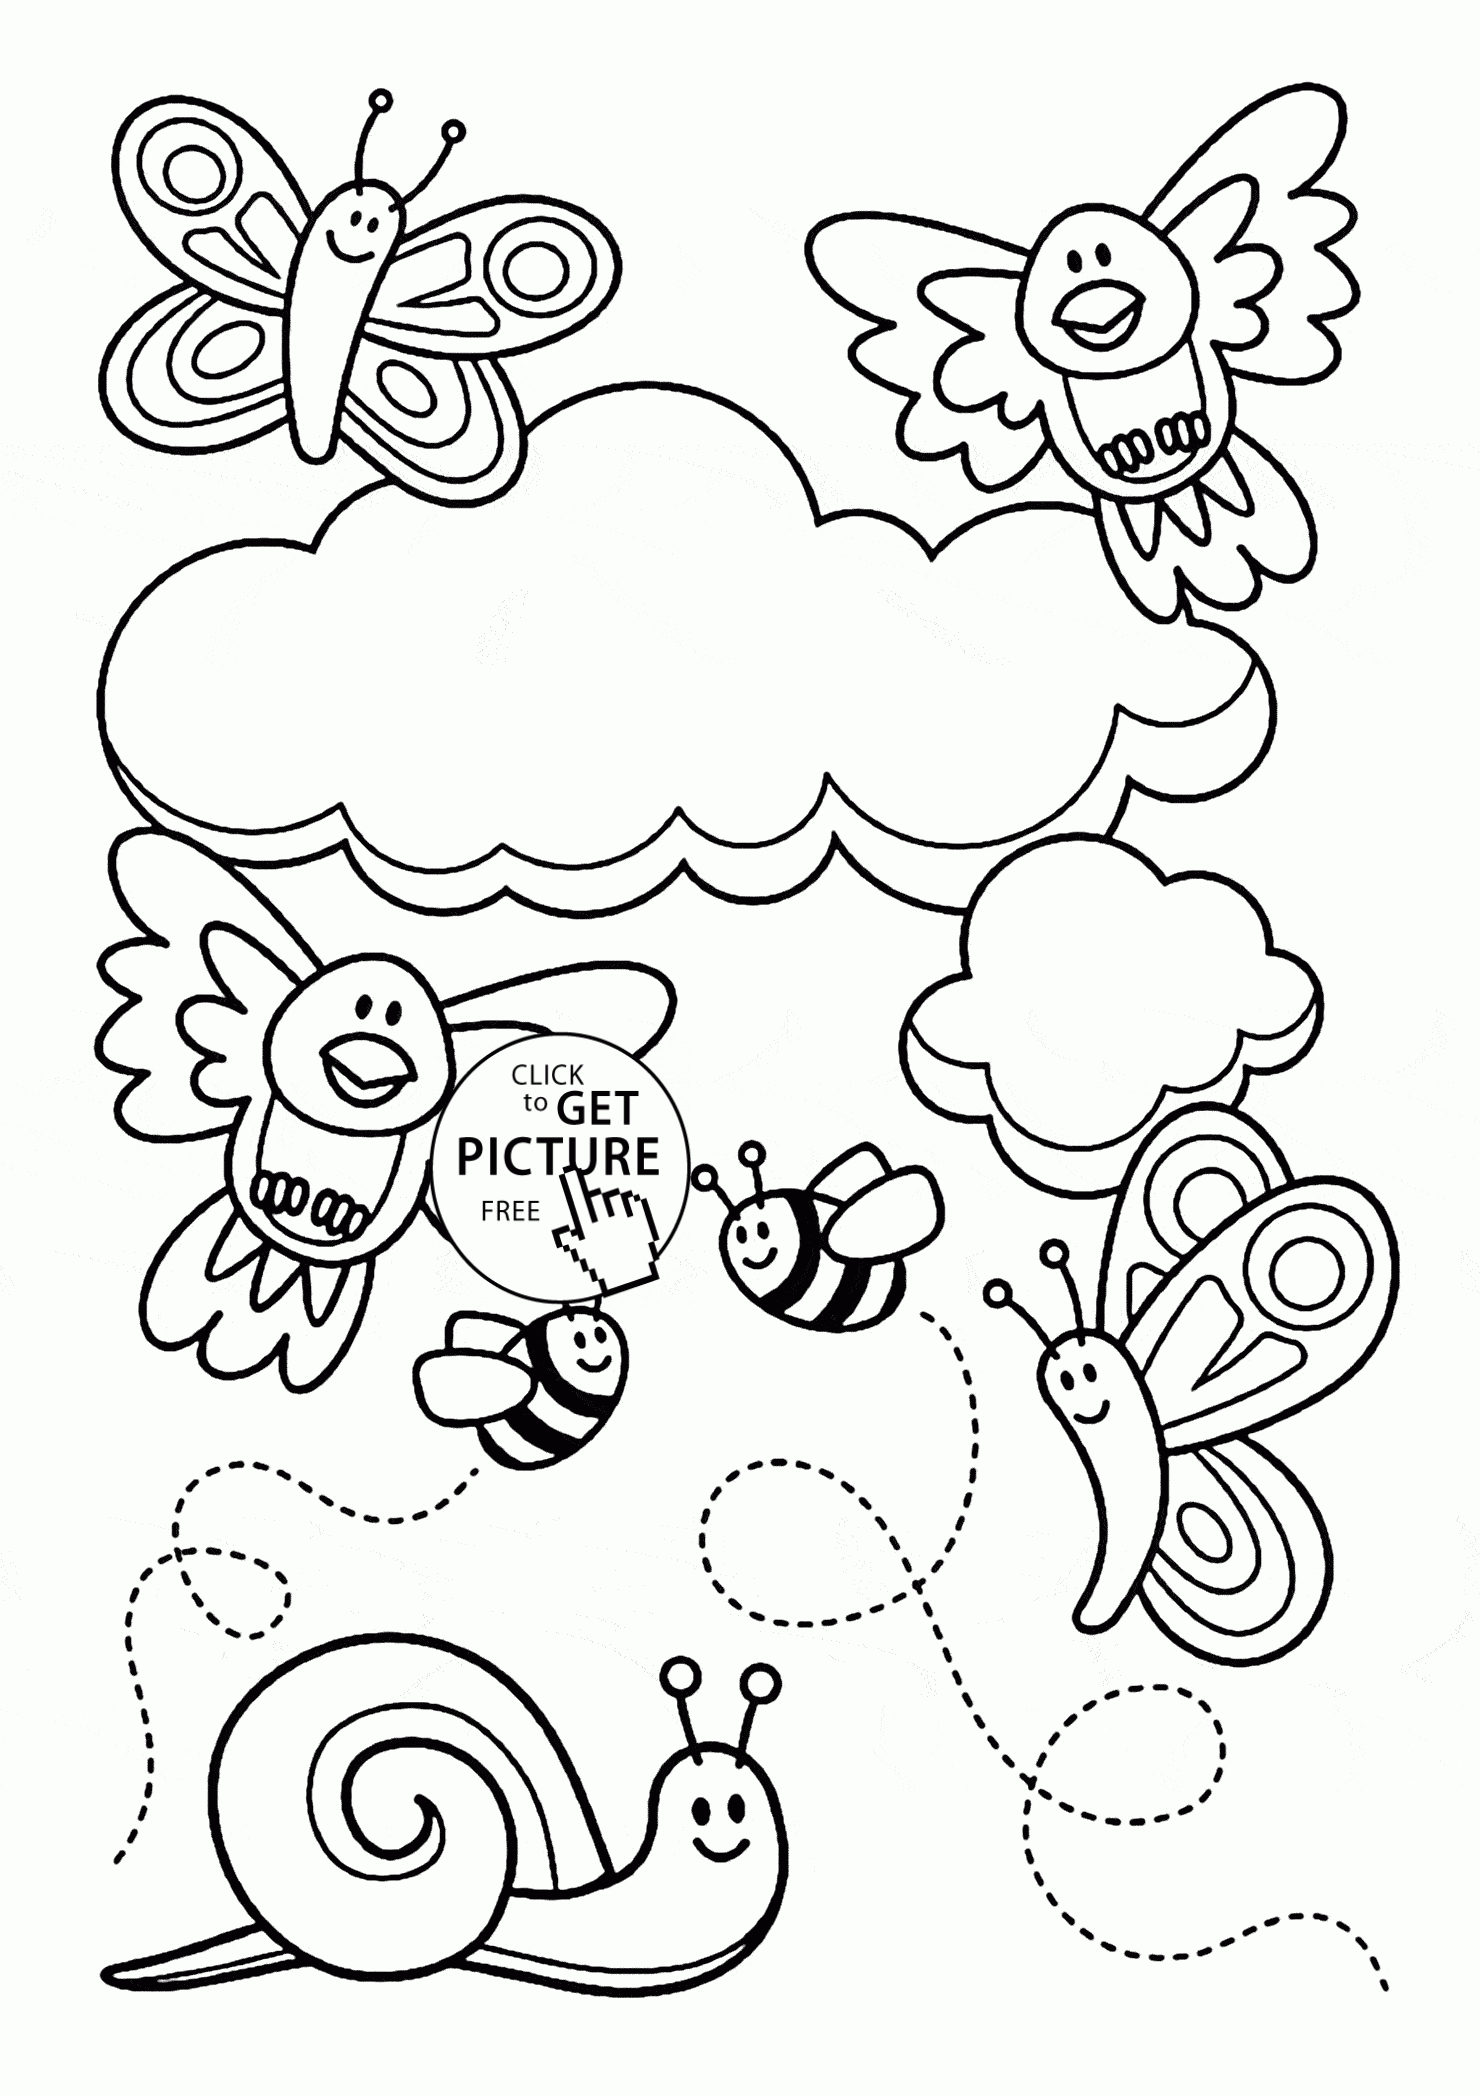 Free Printable Spring Coloring Pages For Adults | Free ...